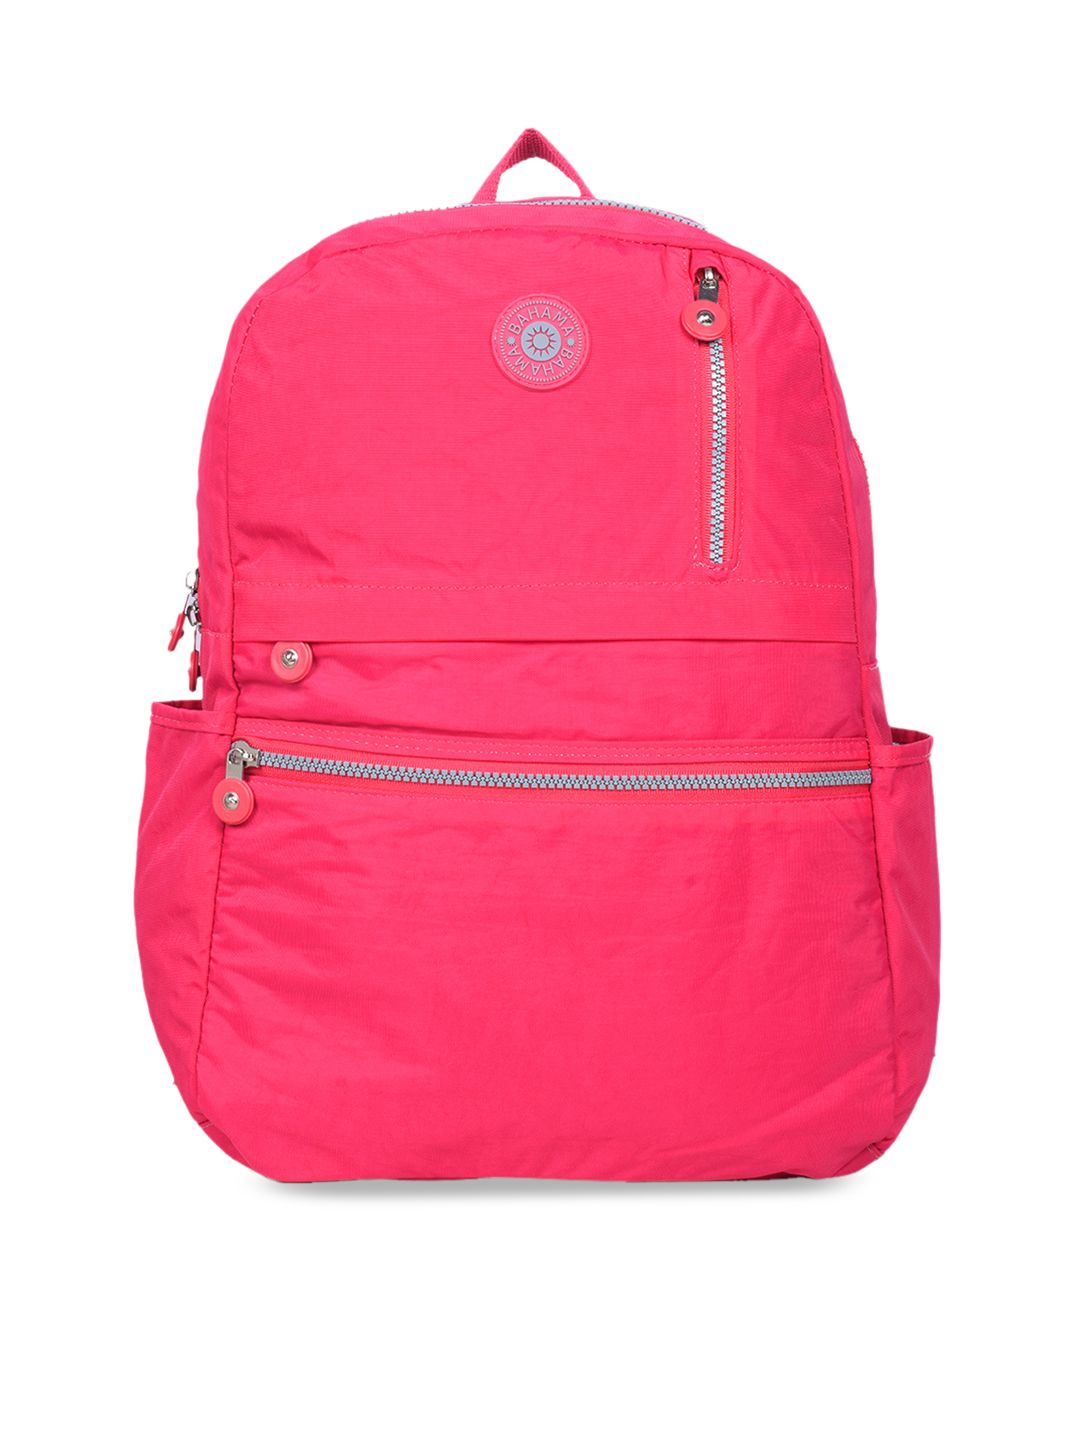 BAHAMA Crinkle Unisex Fuchsia Red Solid Backpack Price in India